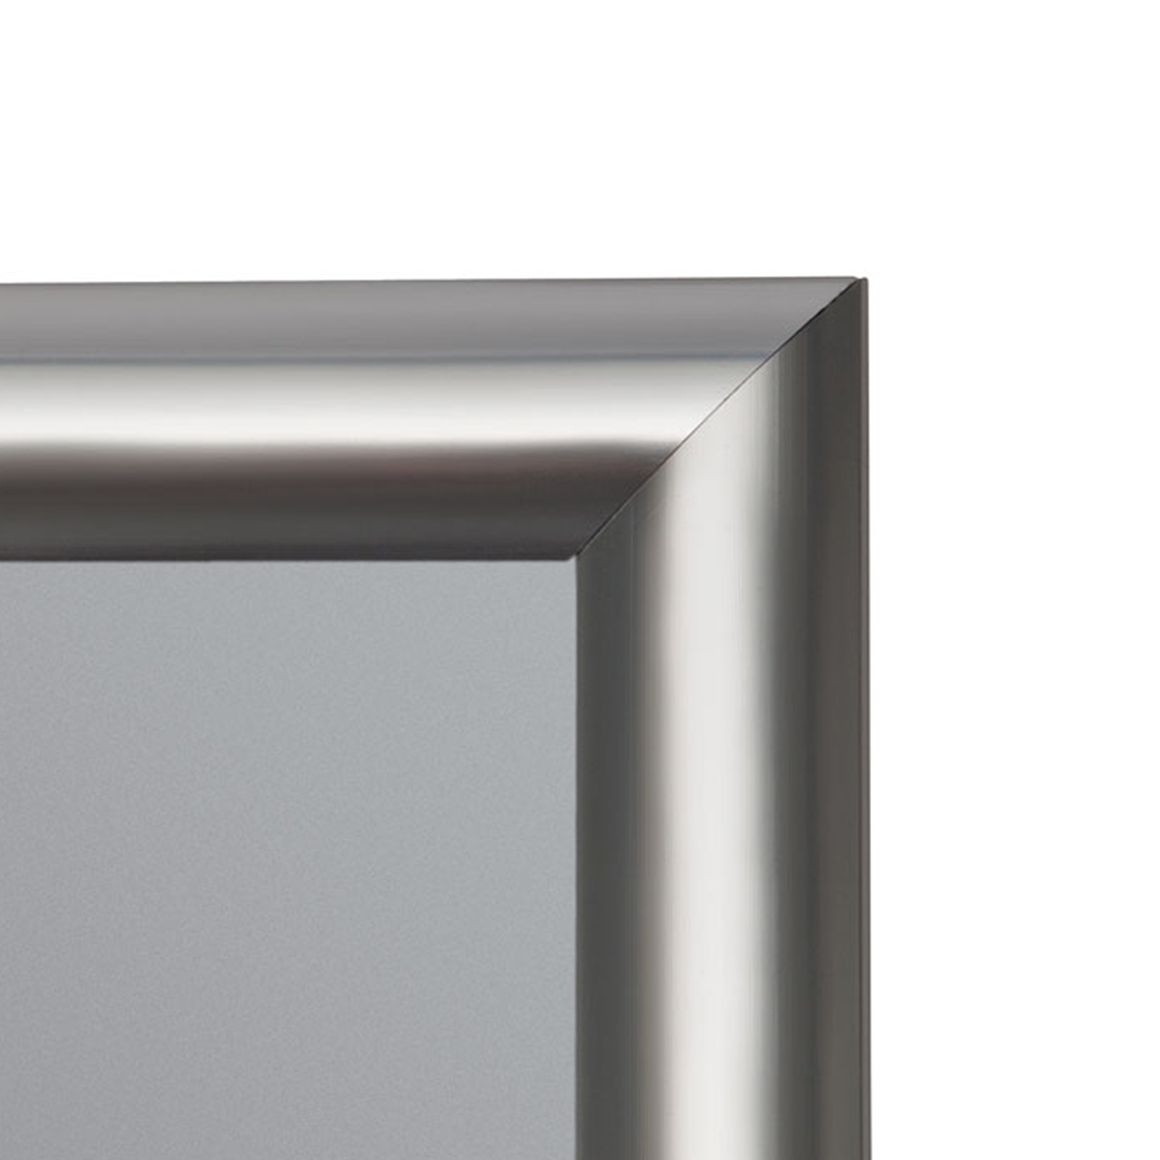 snap-frames-stainless-steel-finish